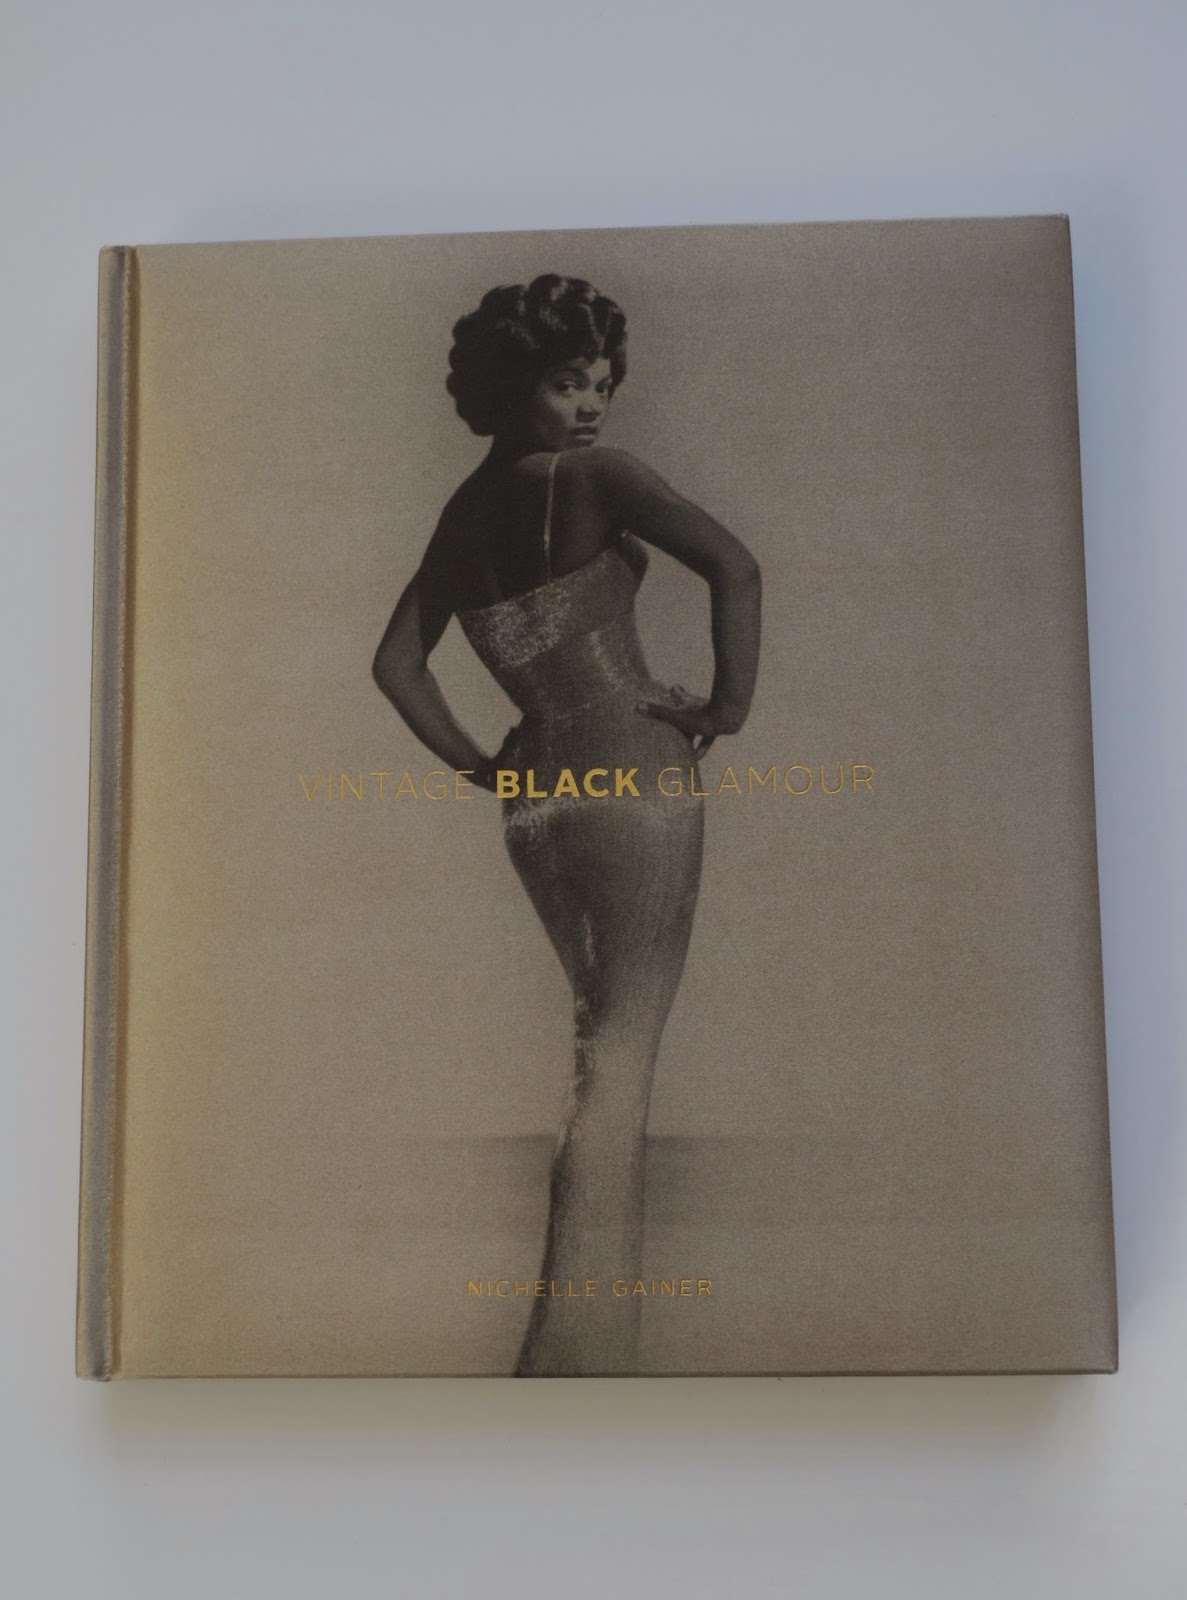 Vintage Black Glamour by Nichelle Gainer- Book Review